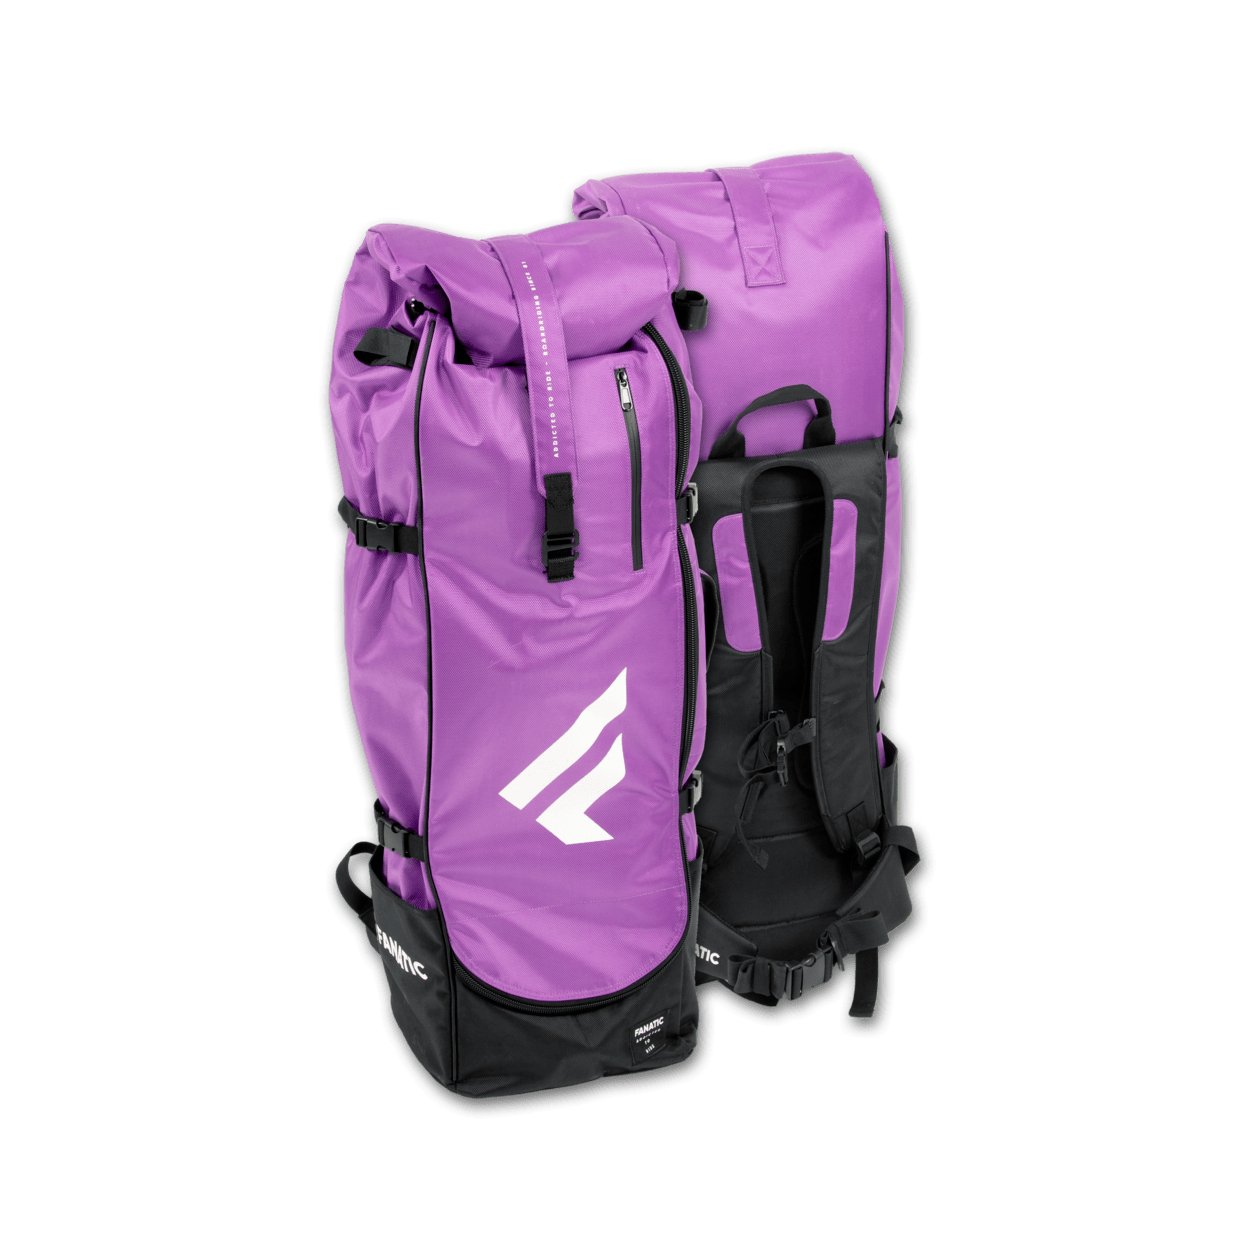 Fanatic Gearbag Pocket iSUP 2024 - Worthing Watersports - 9010583037929 - Spareparts - Fanatic SUP